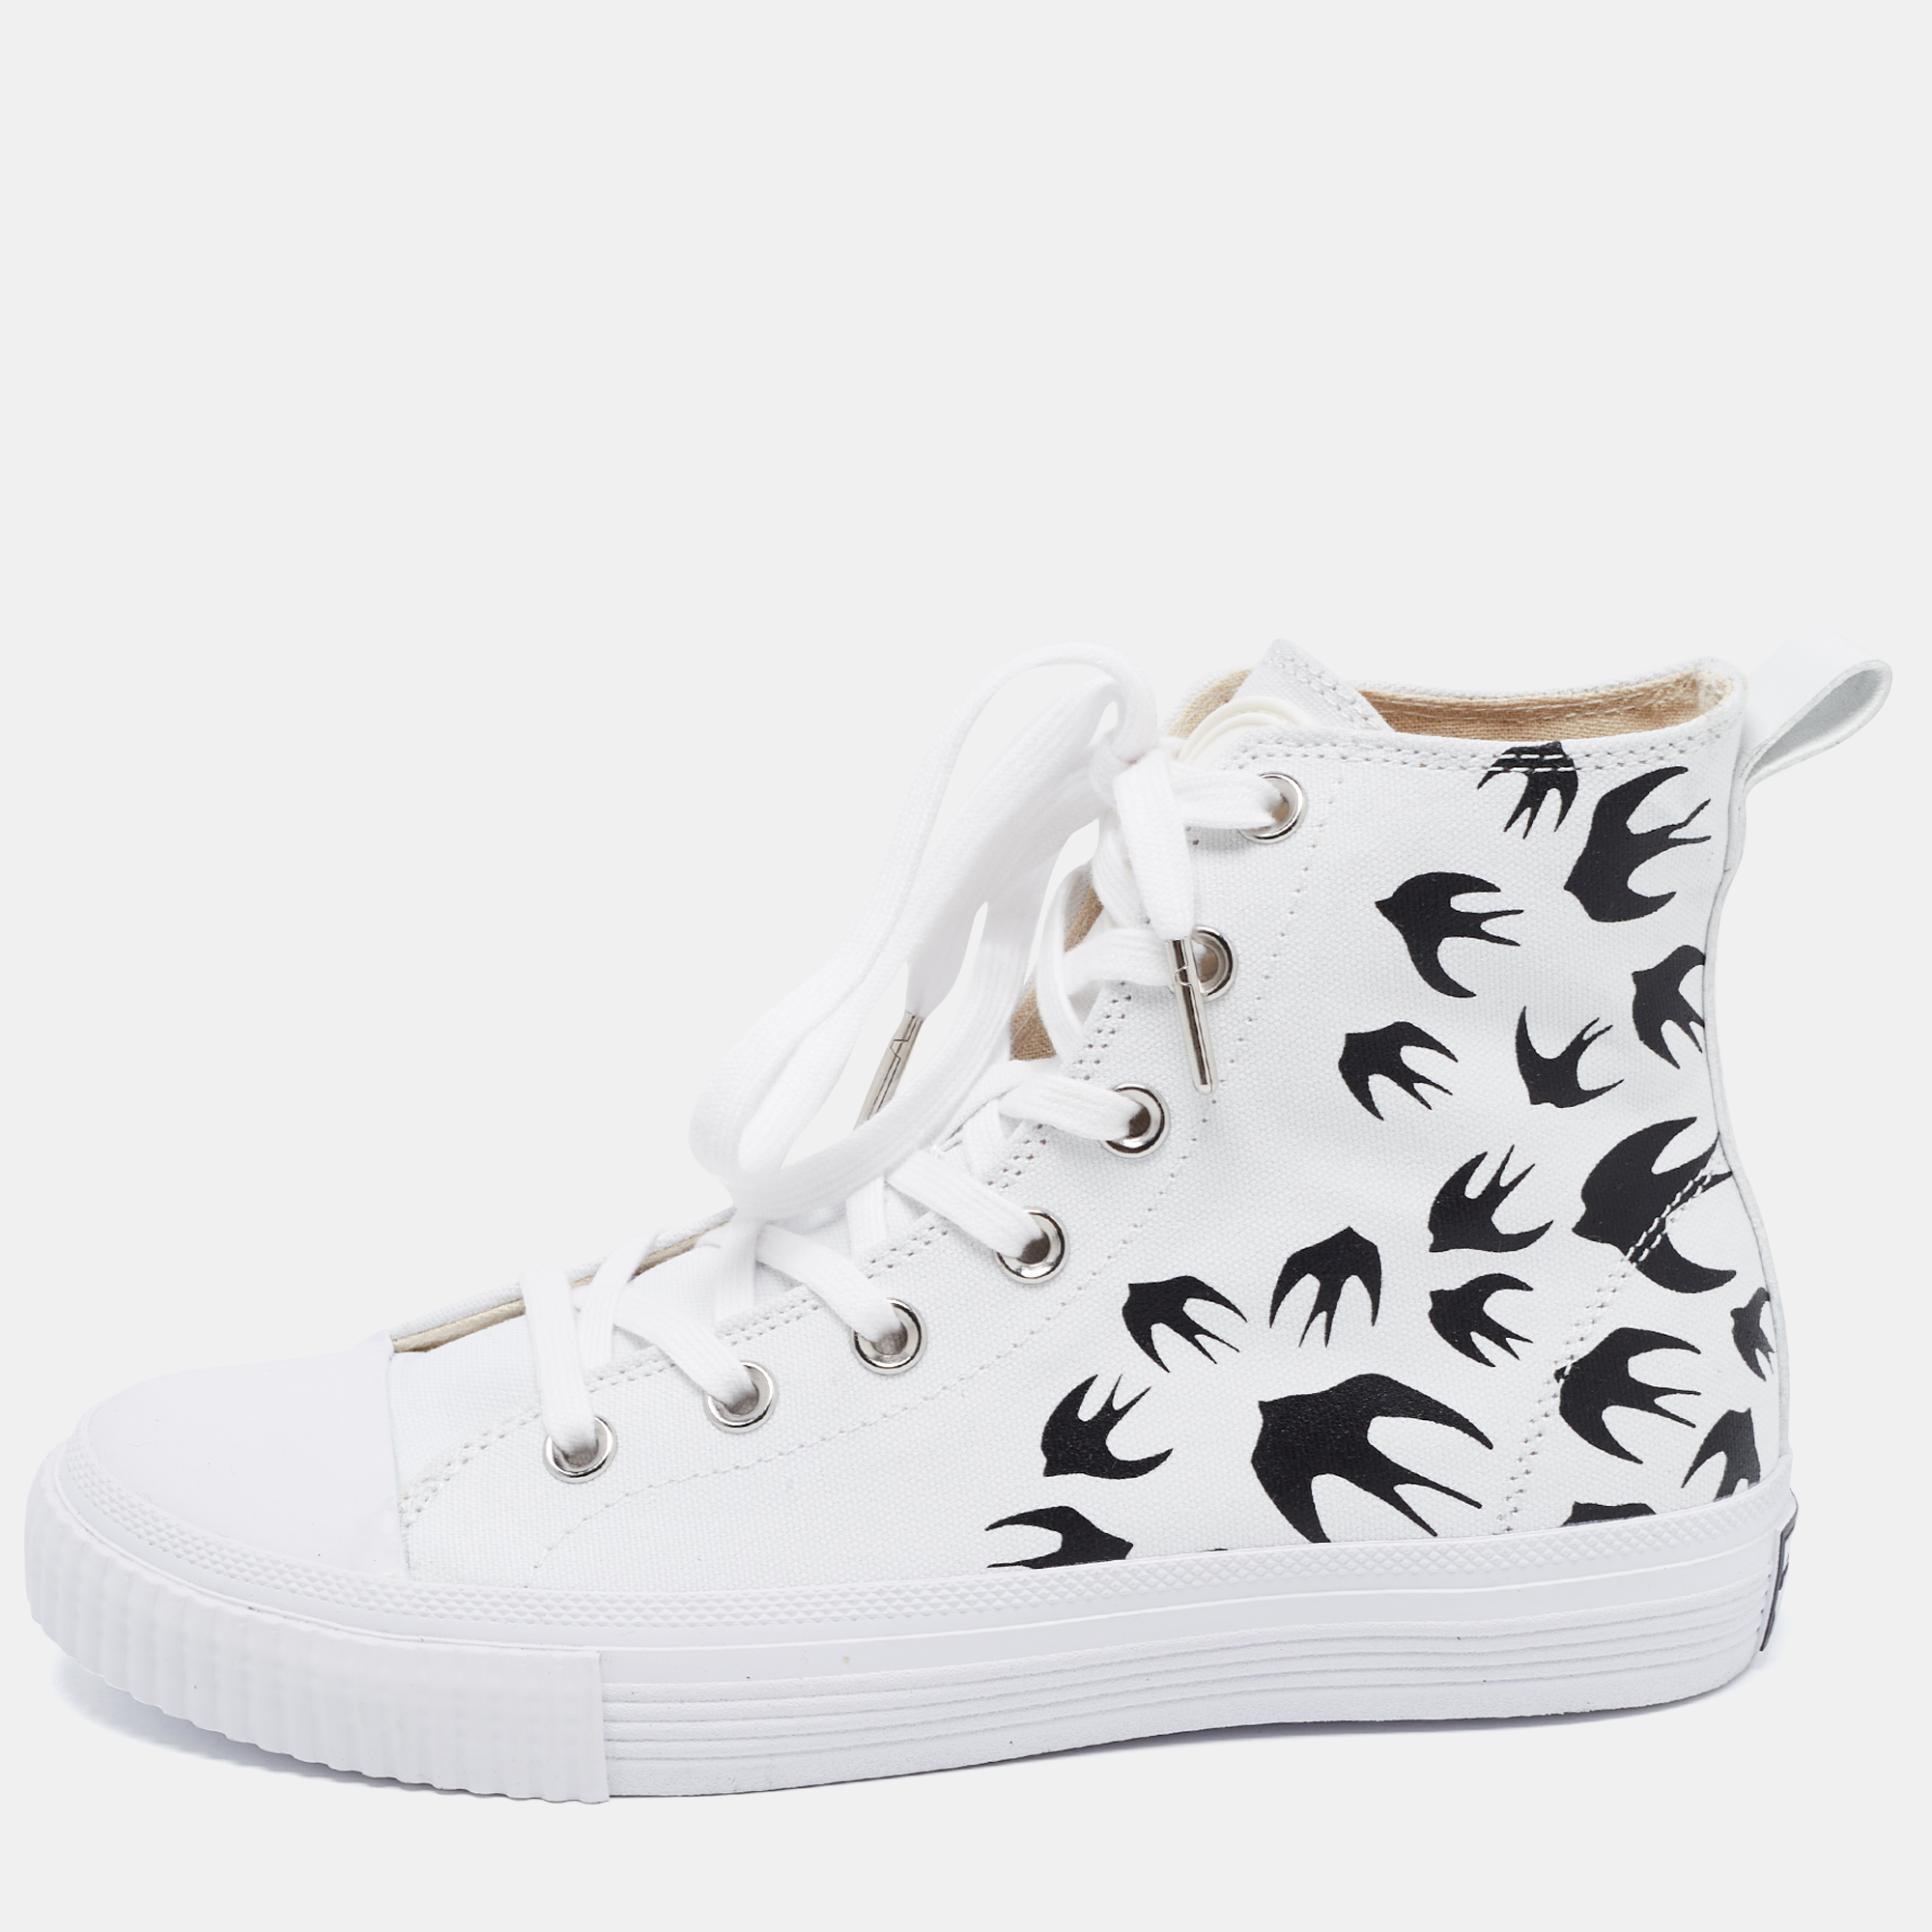 Pre-owned Mcq By Alexander Mcqueen Mcq White Canvas Swallow Plimsoll High Top Trainers Size 39